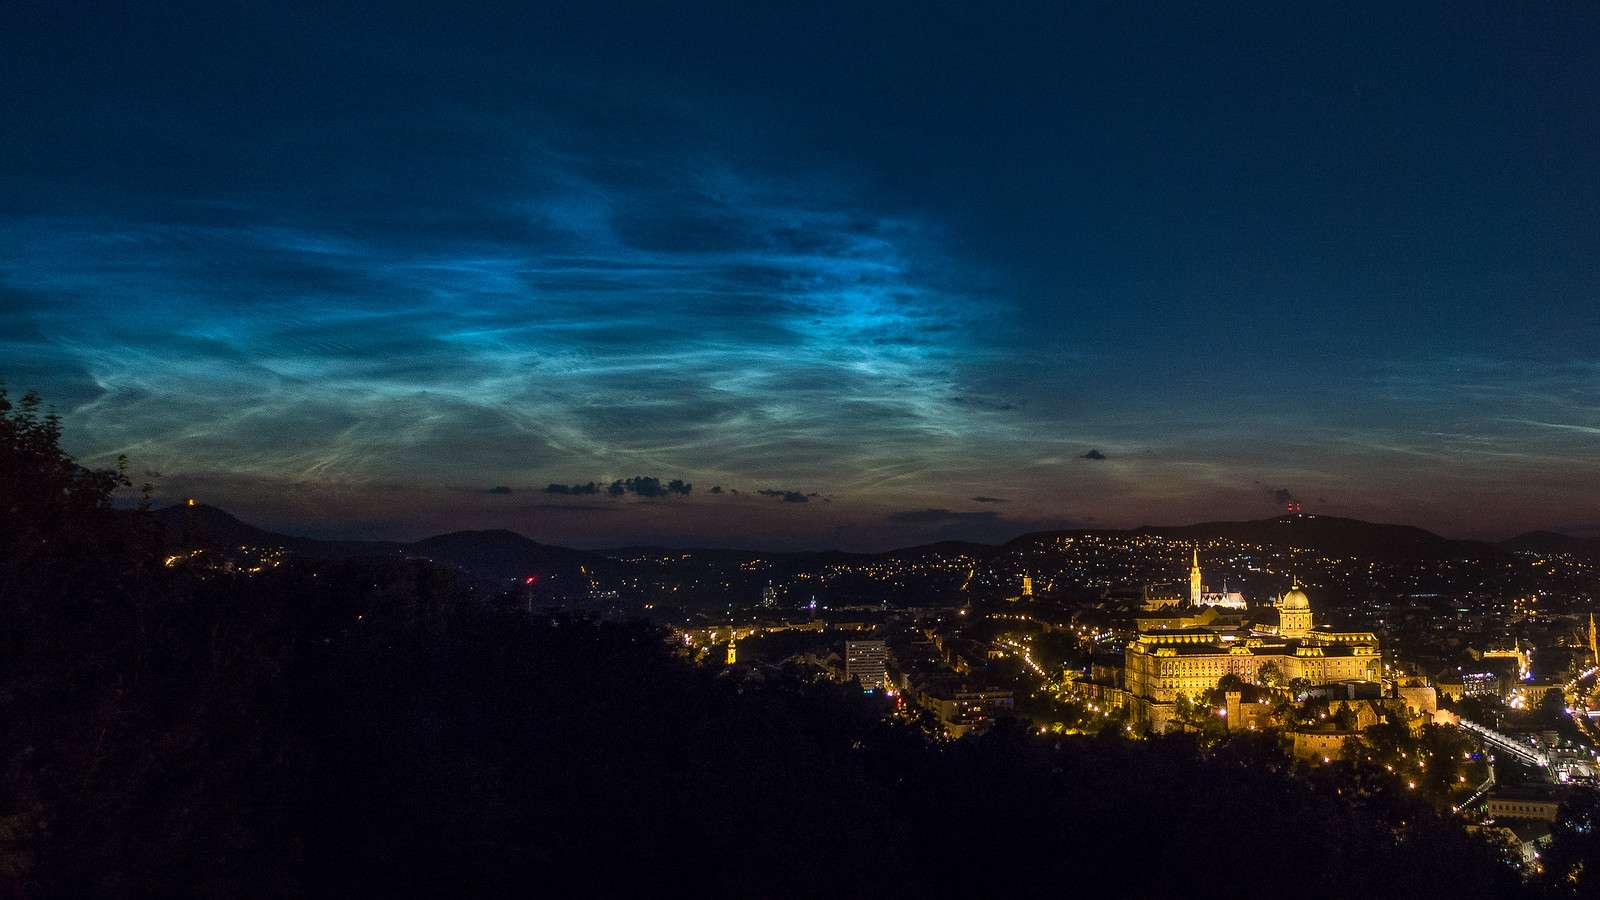 noctilucent clouds over Buda Castle from Citadel